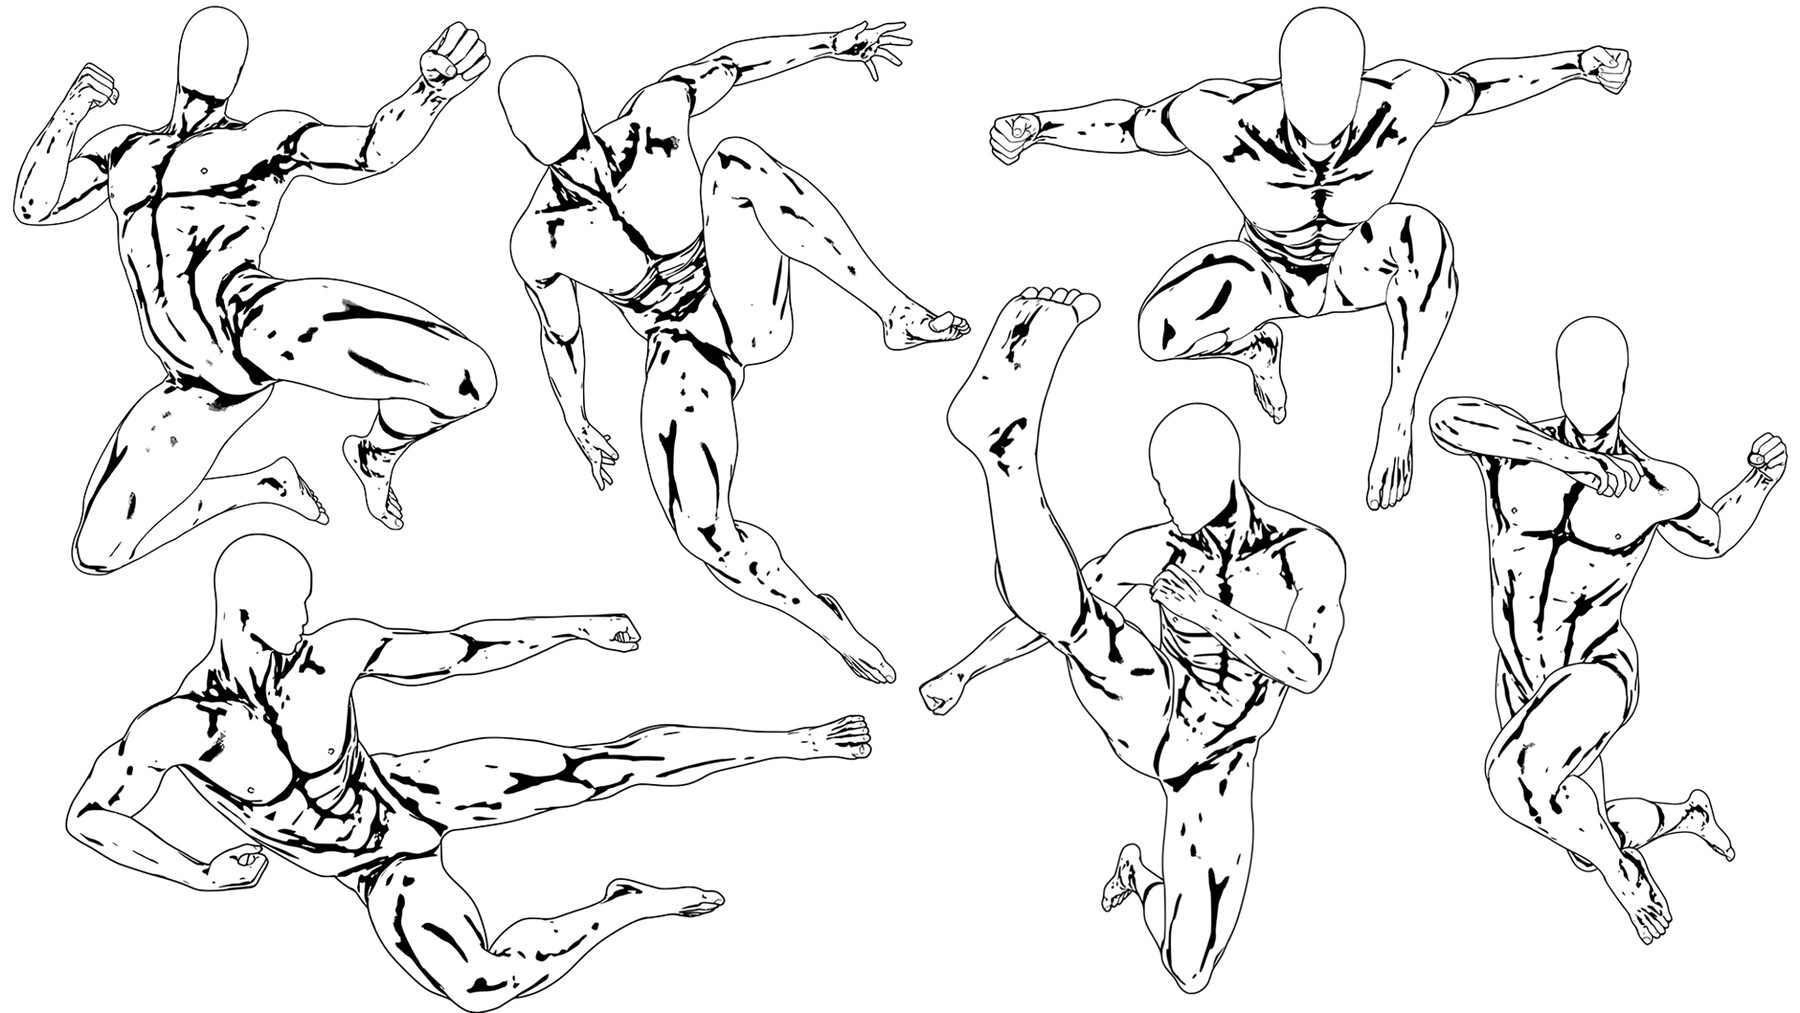 EmilioDekure on X | Drawing reference poses, Anime poses reference, Figure  sketching